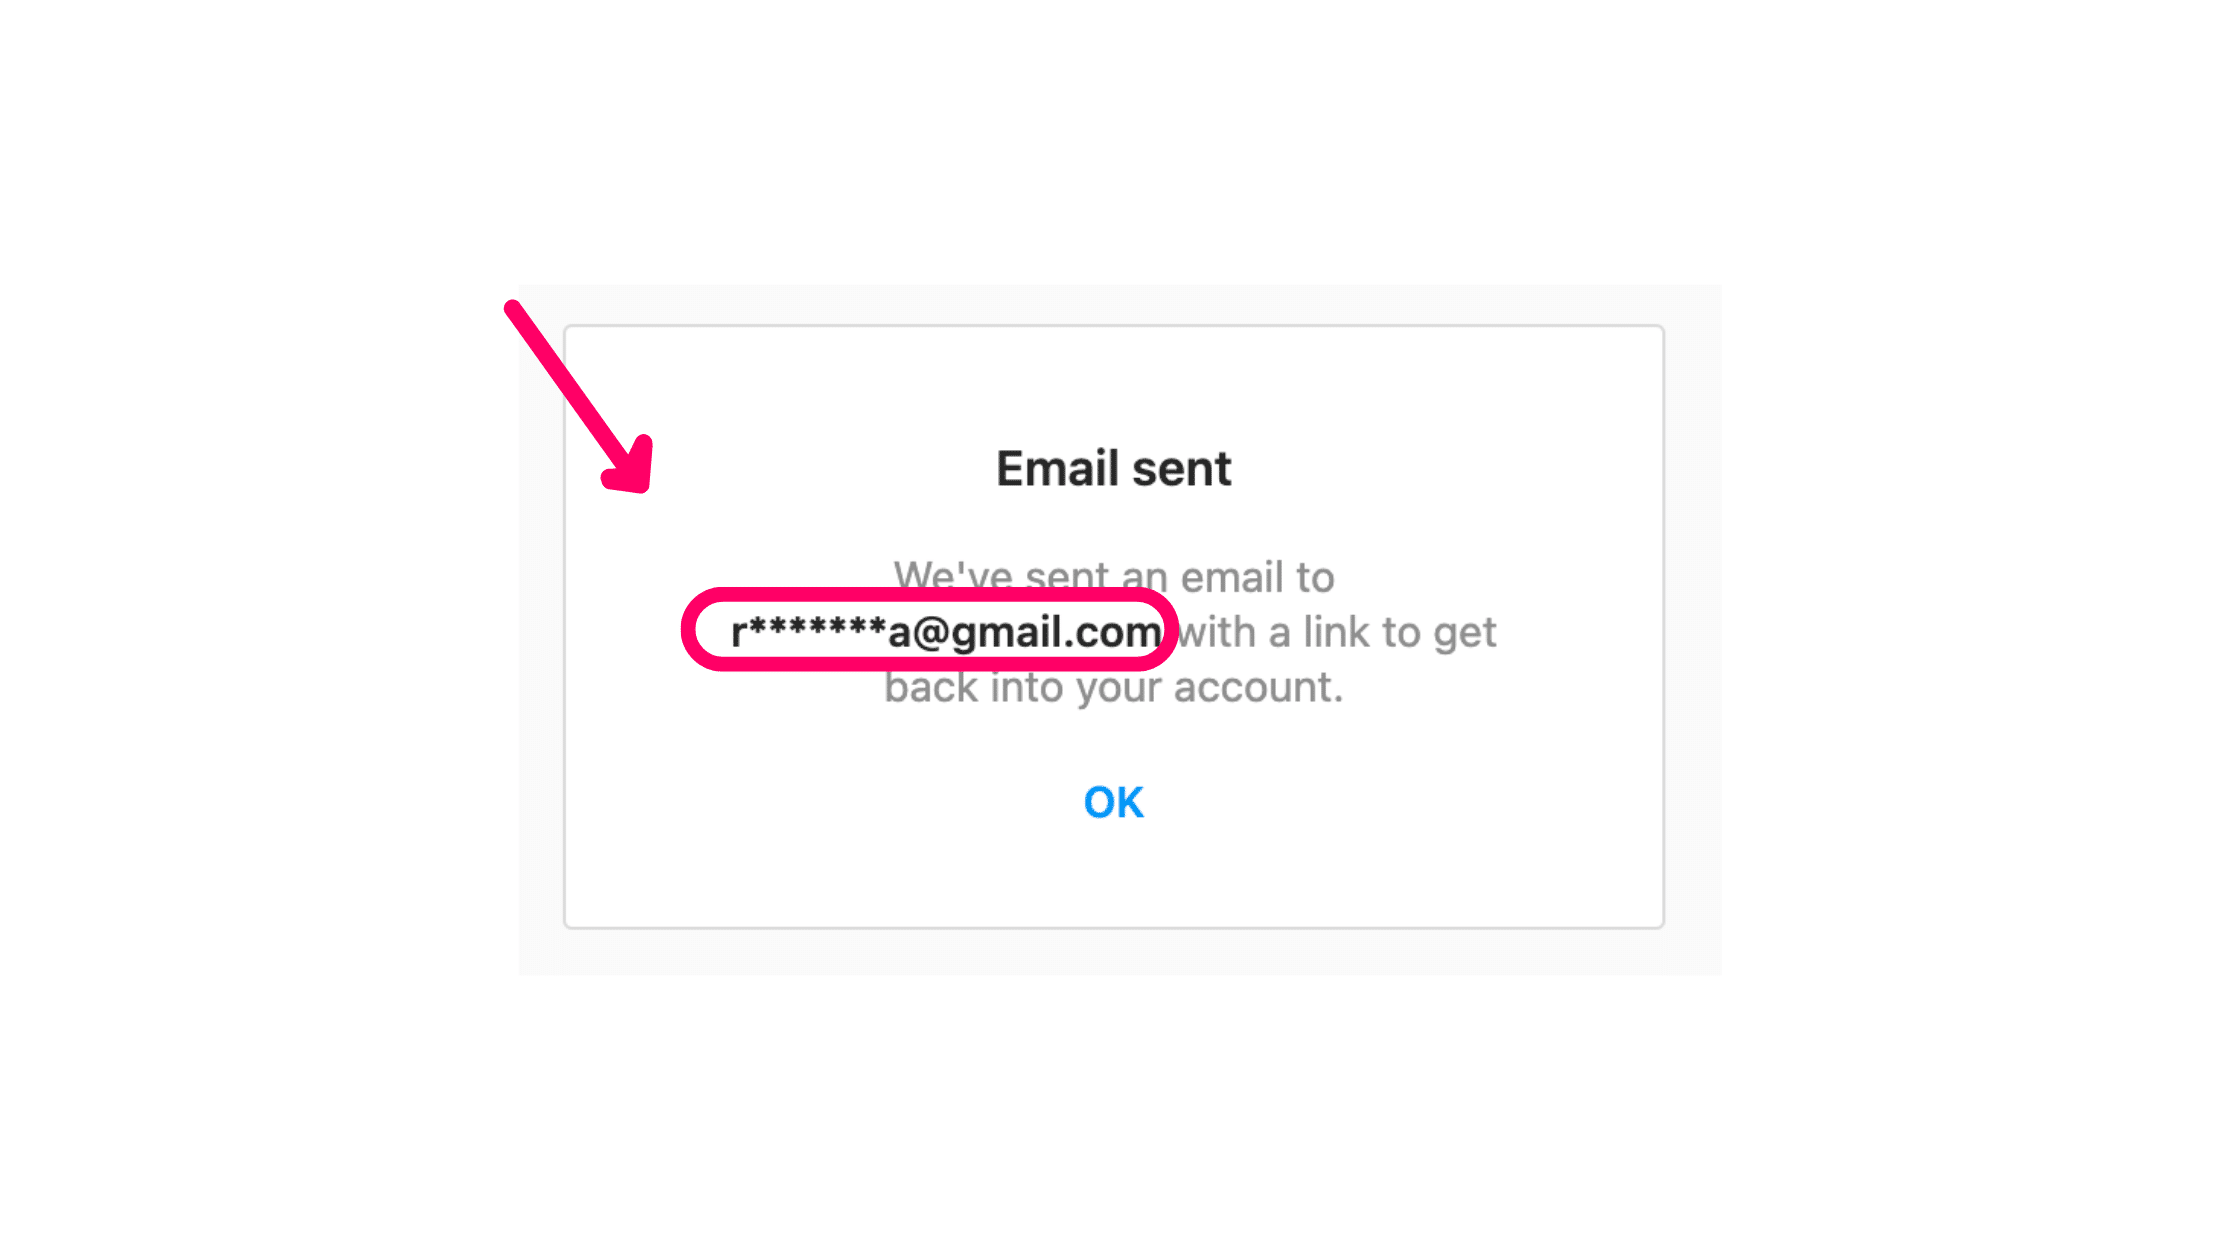 Email sent box from Instagram forgotten password feature.